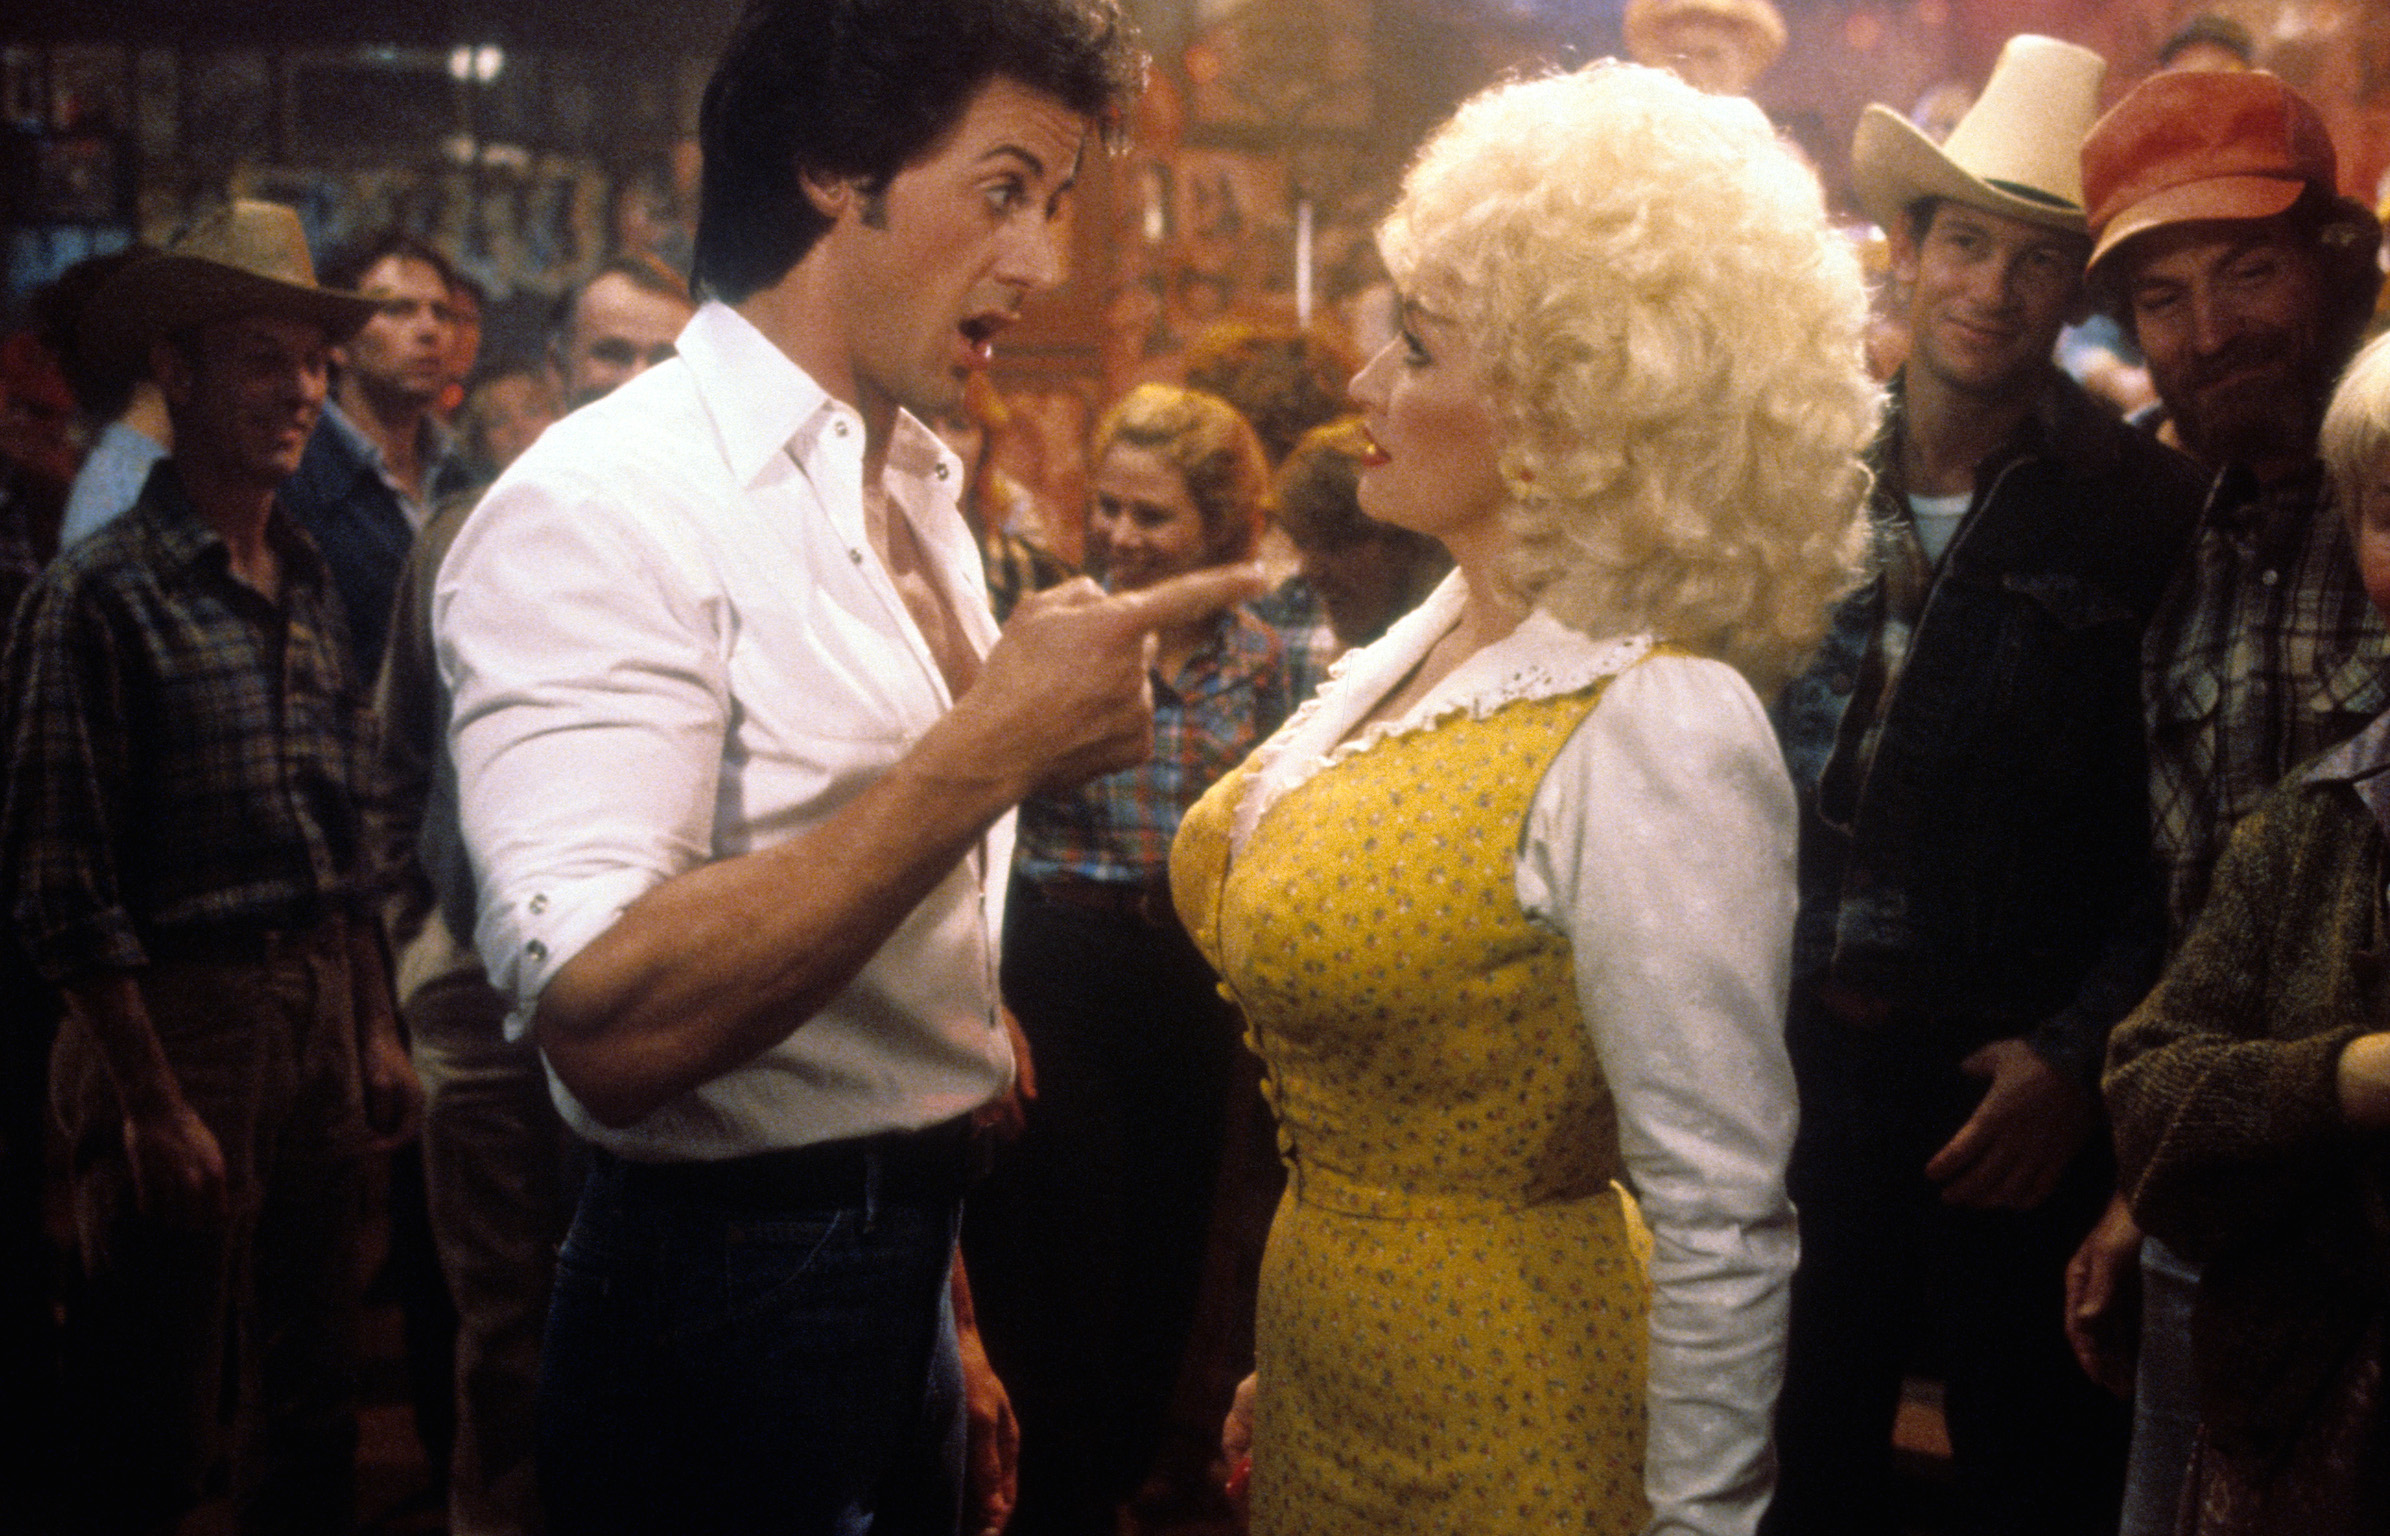 Sylvester Stallone points to Dolly Parton in a scene from the film 'Rhinestone' 